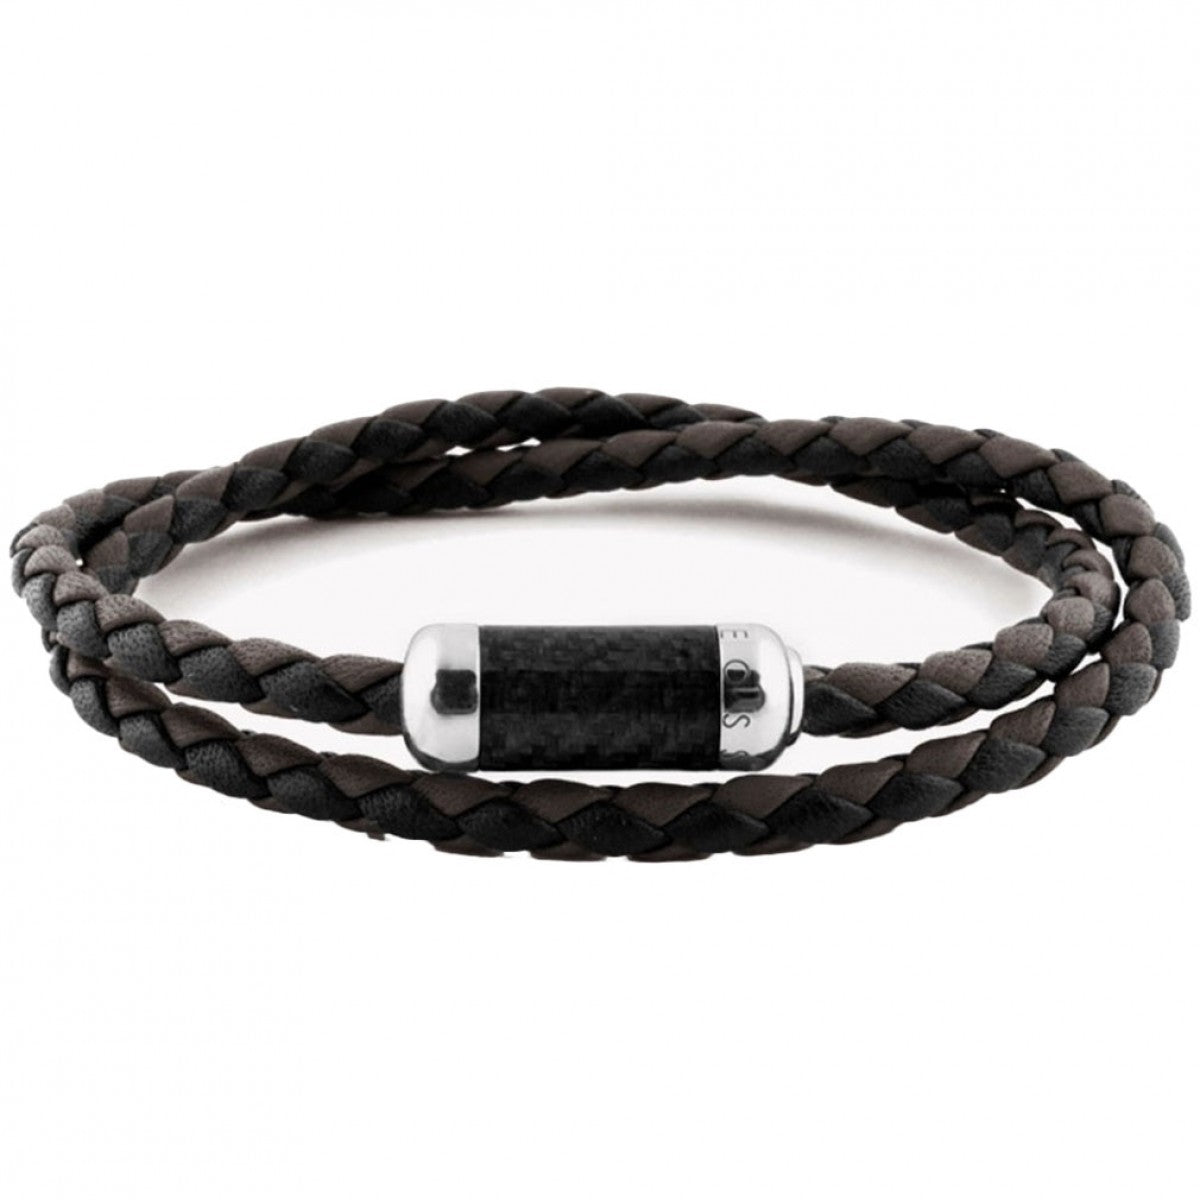 Tateossian Leather Wrap Bracelet, Black and Brown Leather with Silver Black Alutex Clasp